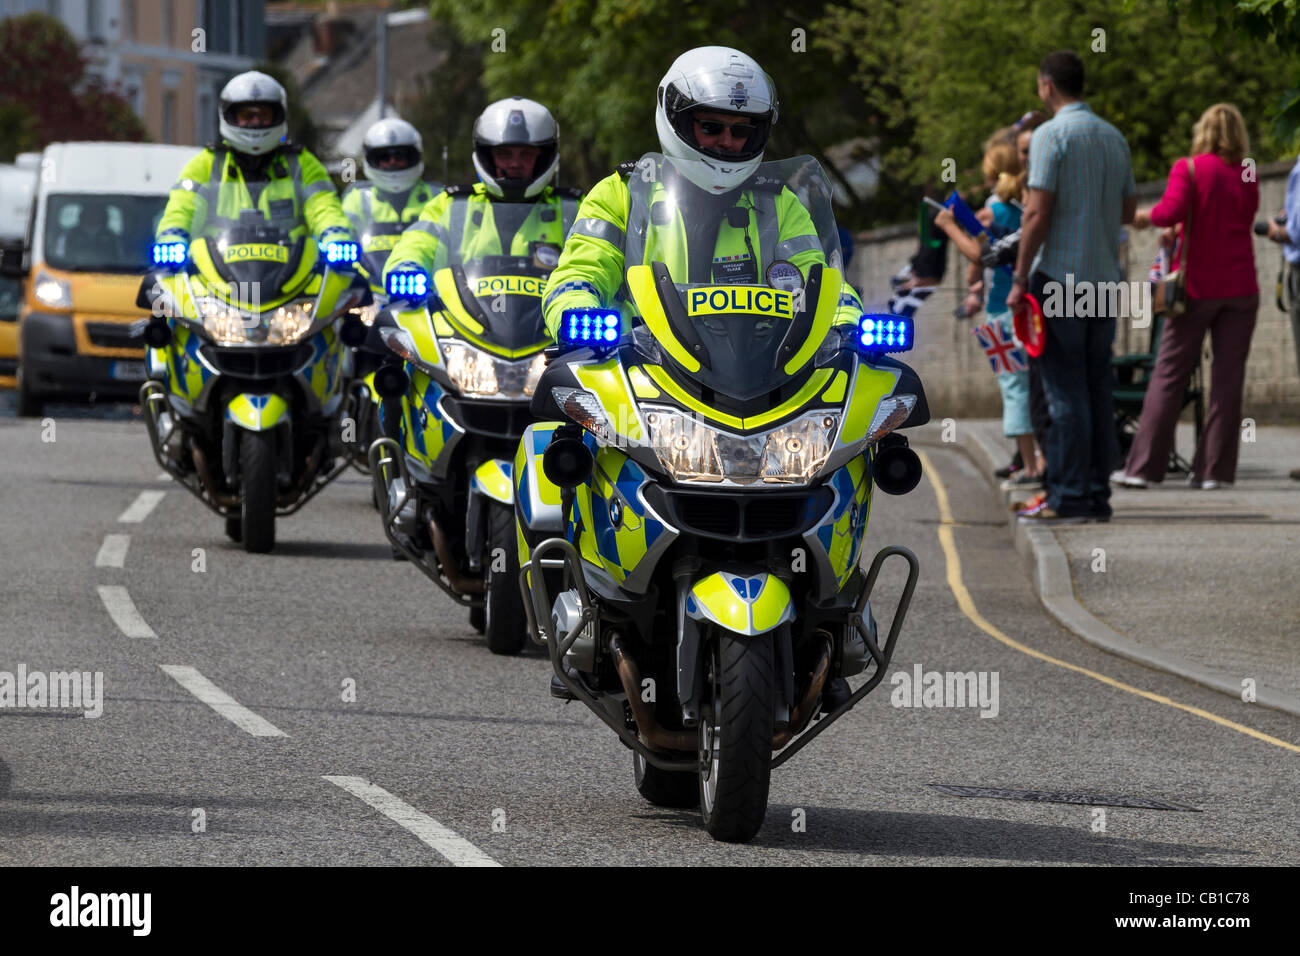 Falmouth, UK. 19 May, 2012. Part of the police escort for the torch bearers Stock Photo